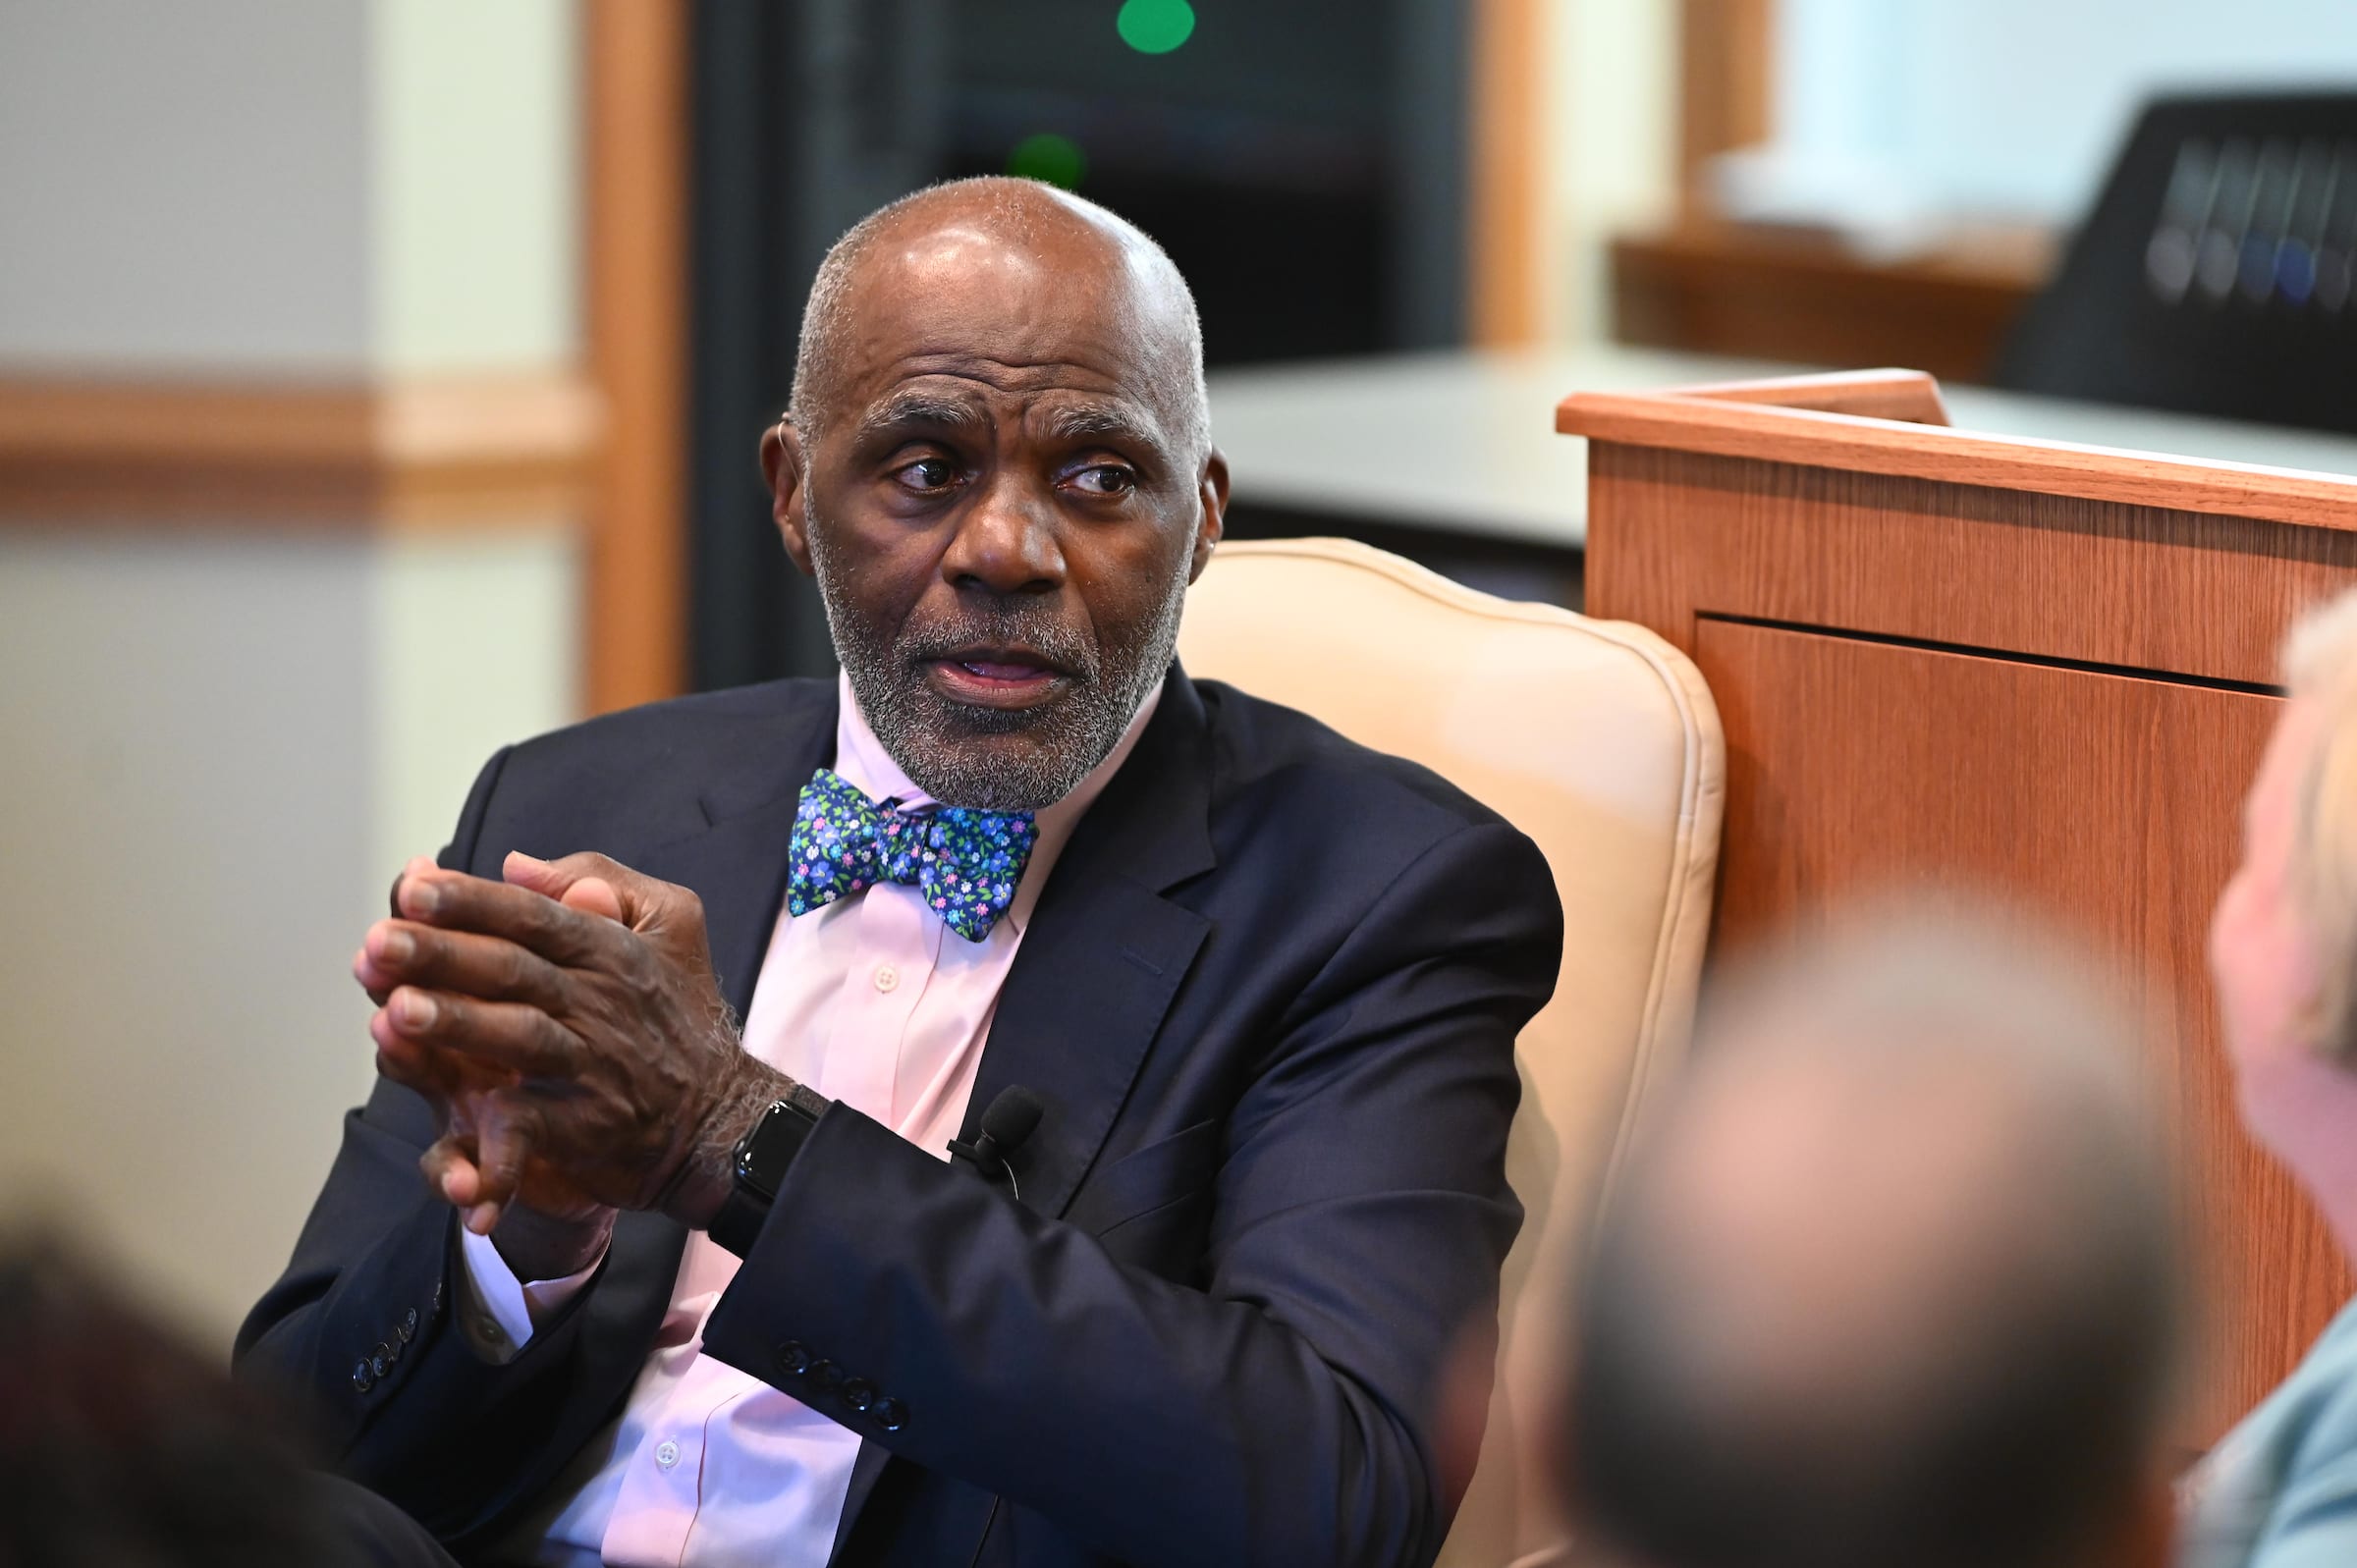 Football, Civil Rights, and Doing Justice: A Conversation with Justice Alan Page